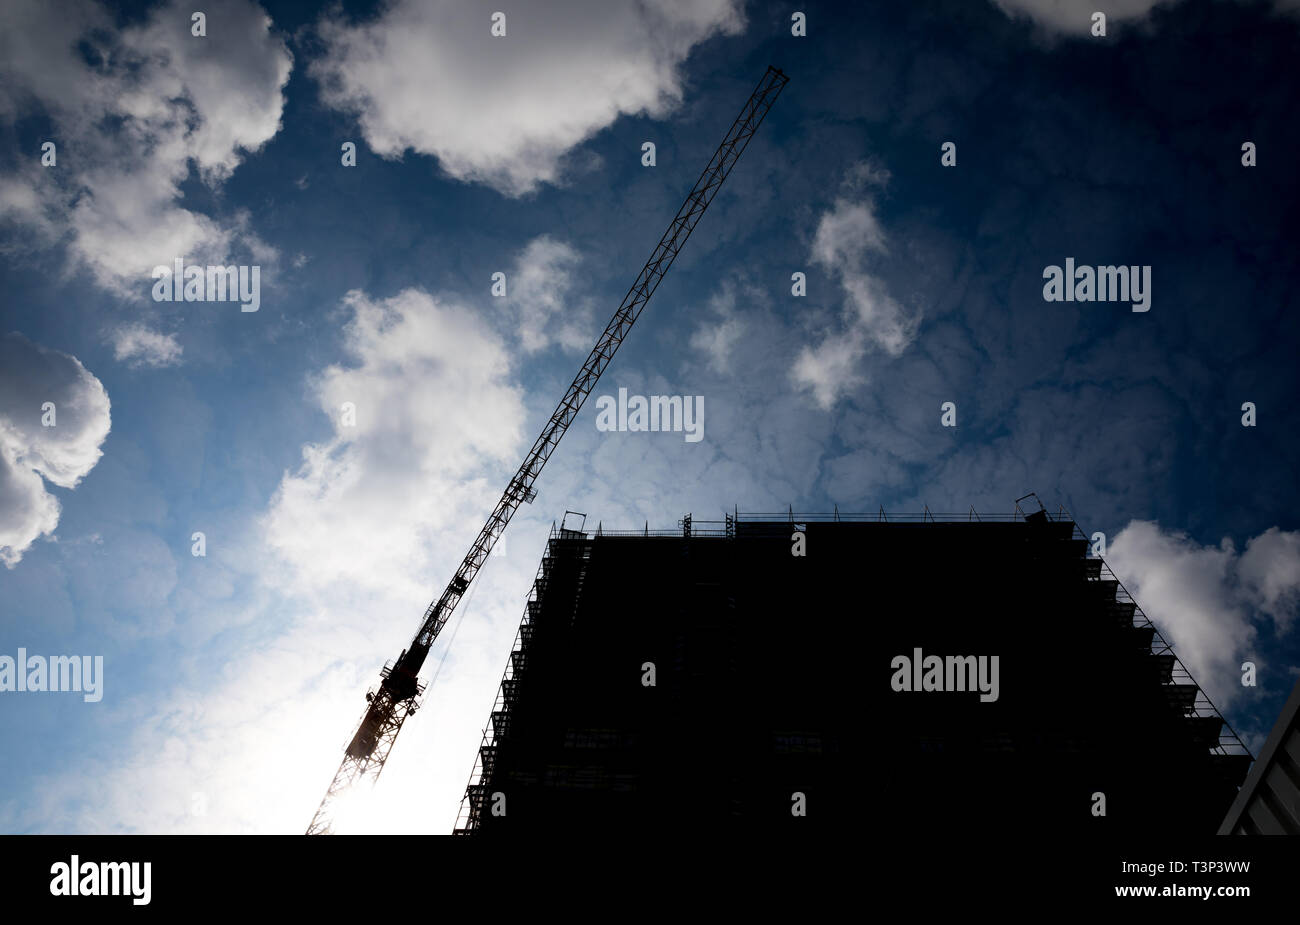 Hannover, Germany. 11th Apr, 2019. Clouds move over a construction crane and a building under construction. An IntercityHotel with 220 hotel rooms on 15 floors is being built near the main railway station. Credit: Moritz Frankenberg/dpa/Alamy Live News Stock Photo